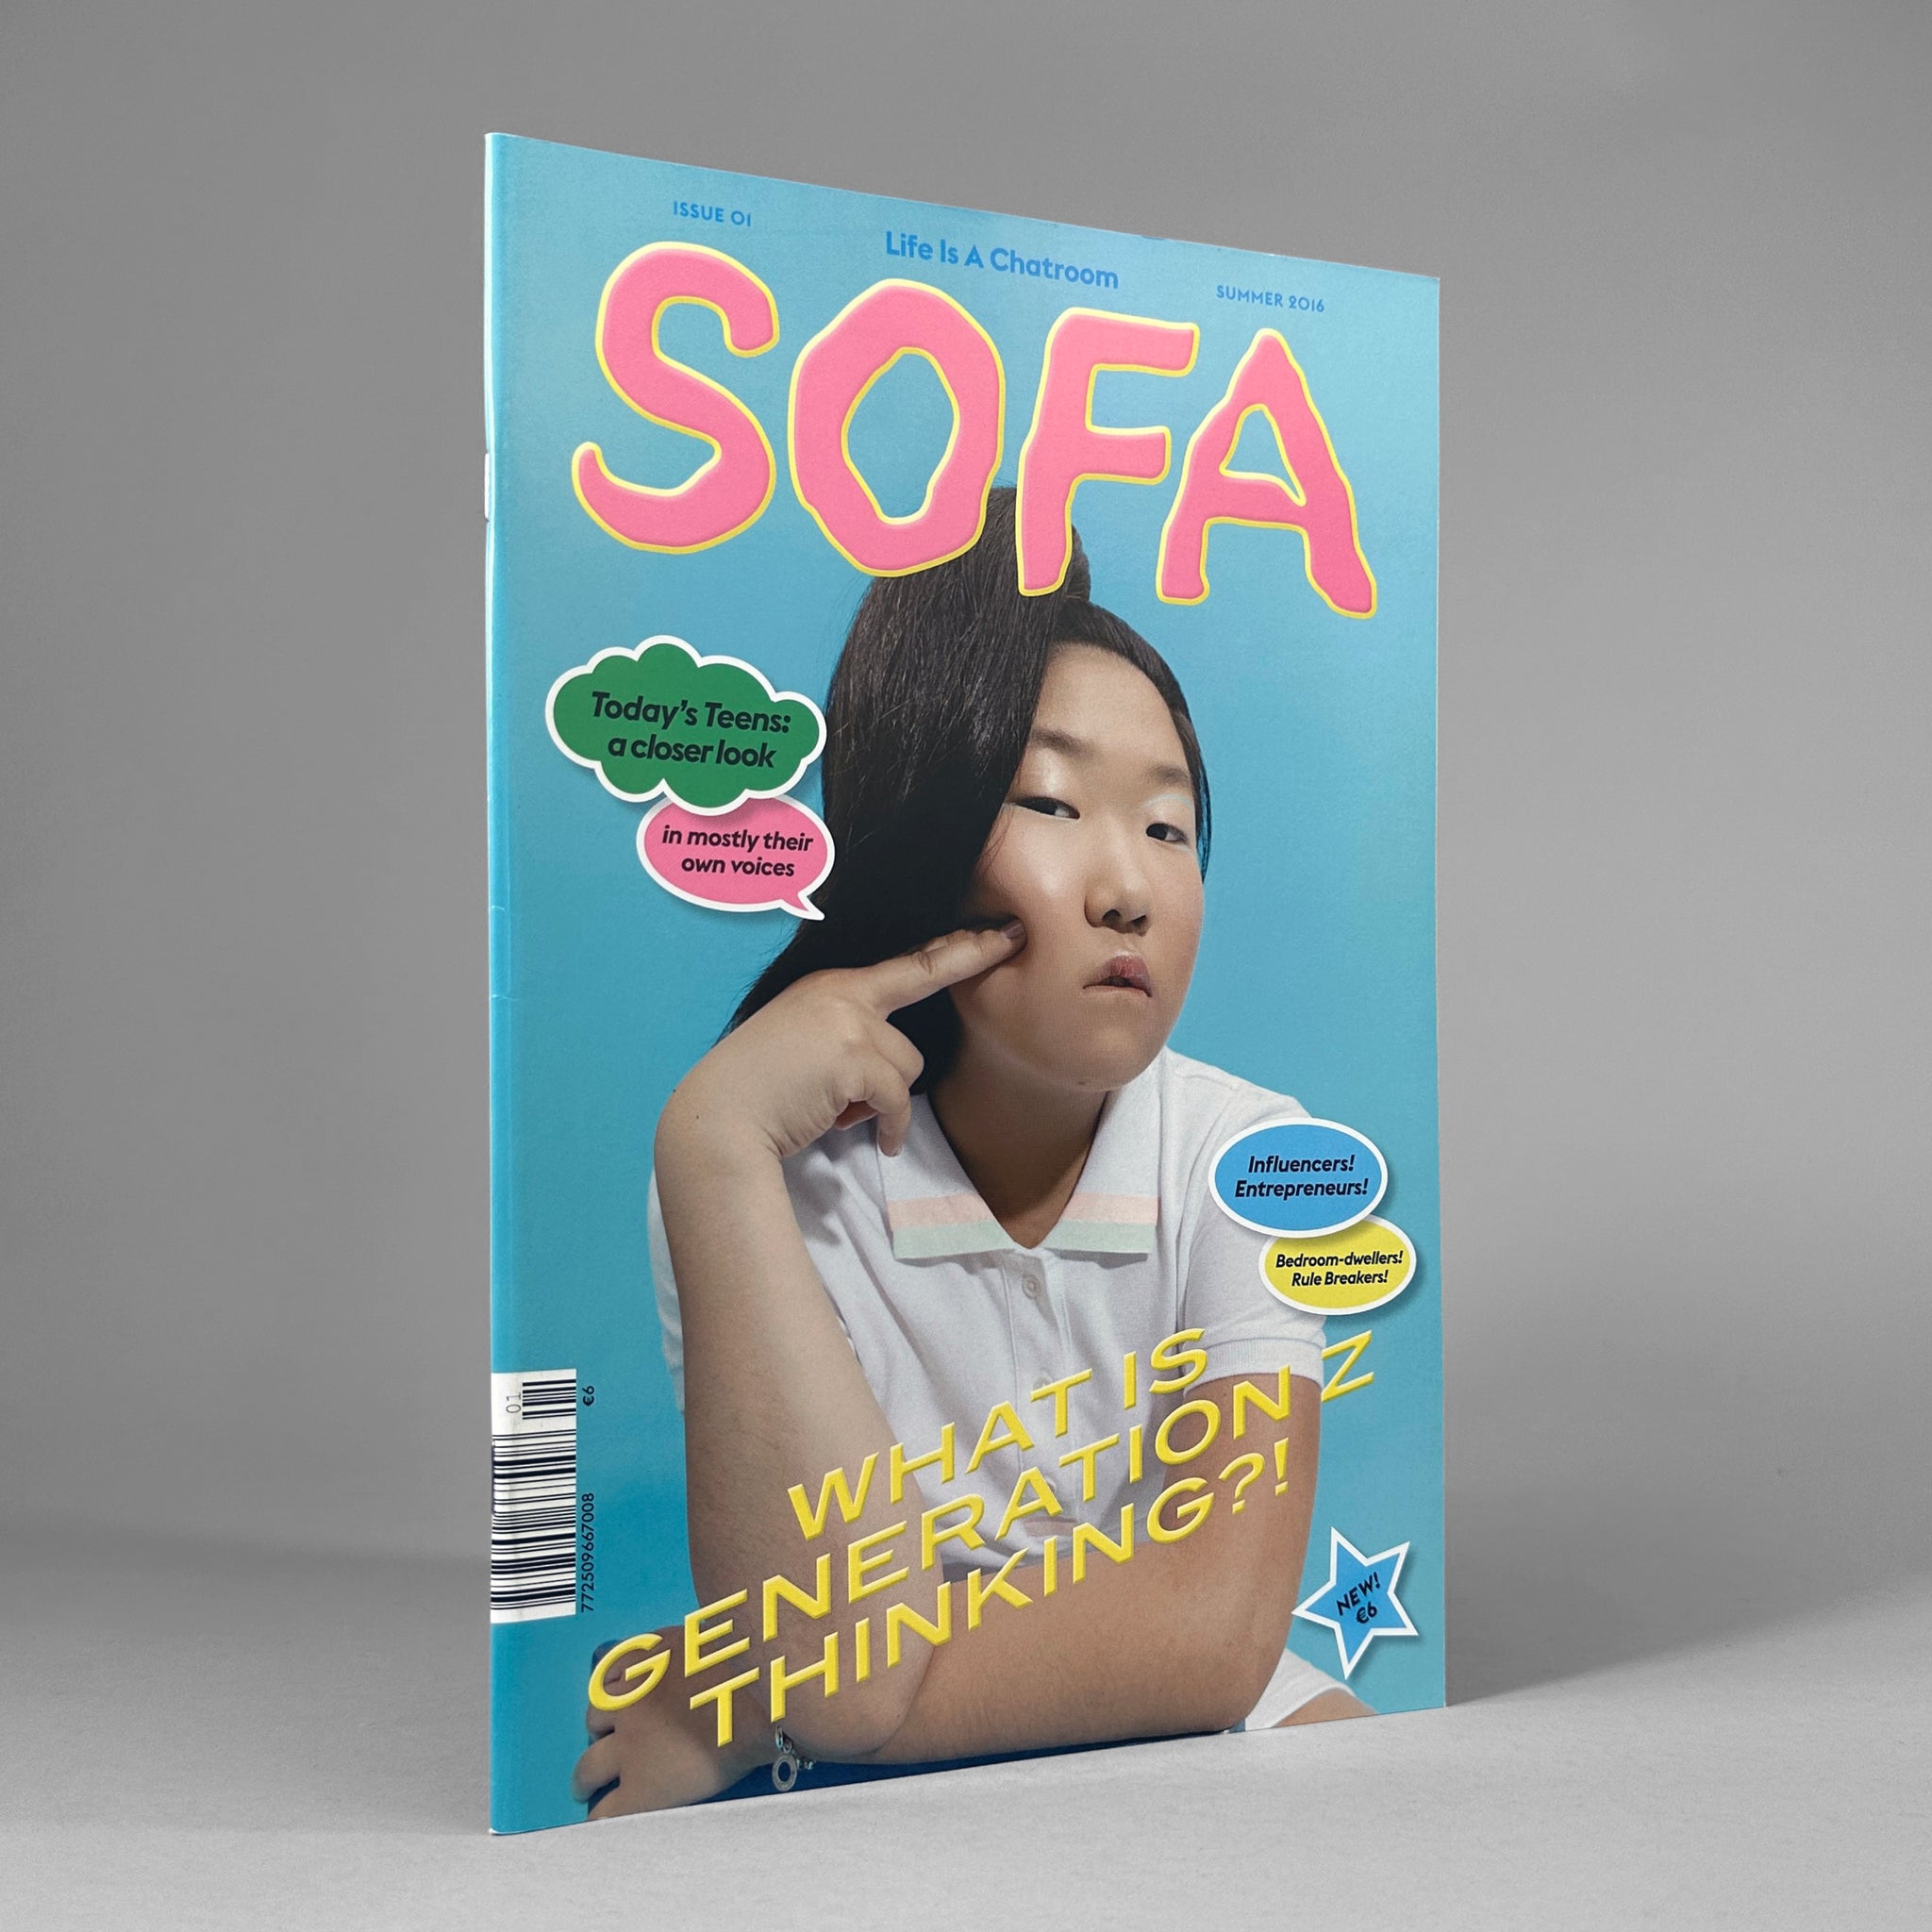 Sofa Issue 01: What Is Generation Z Thinking?